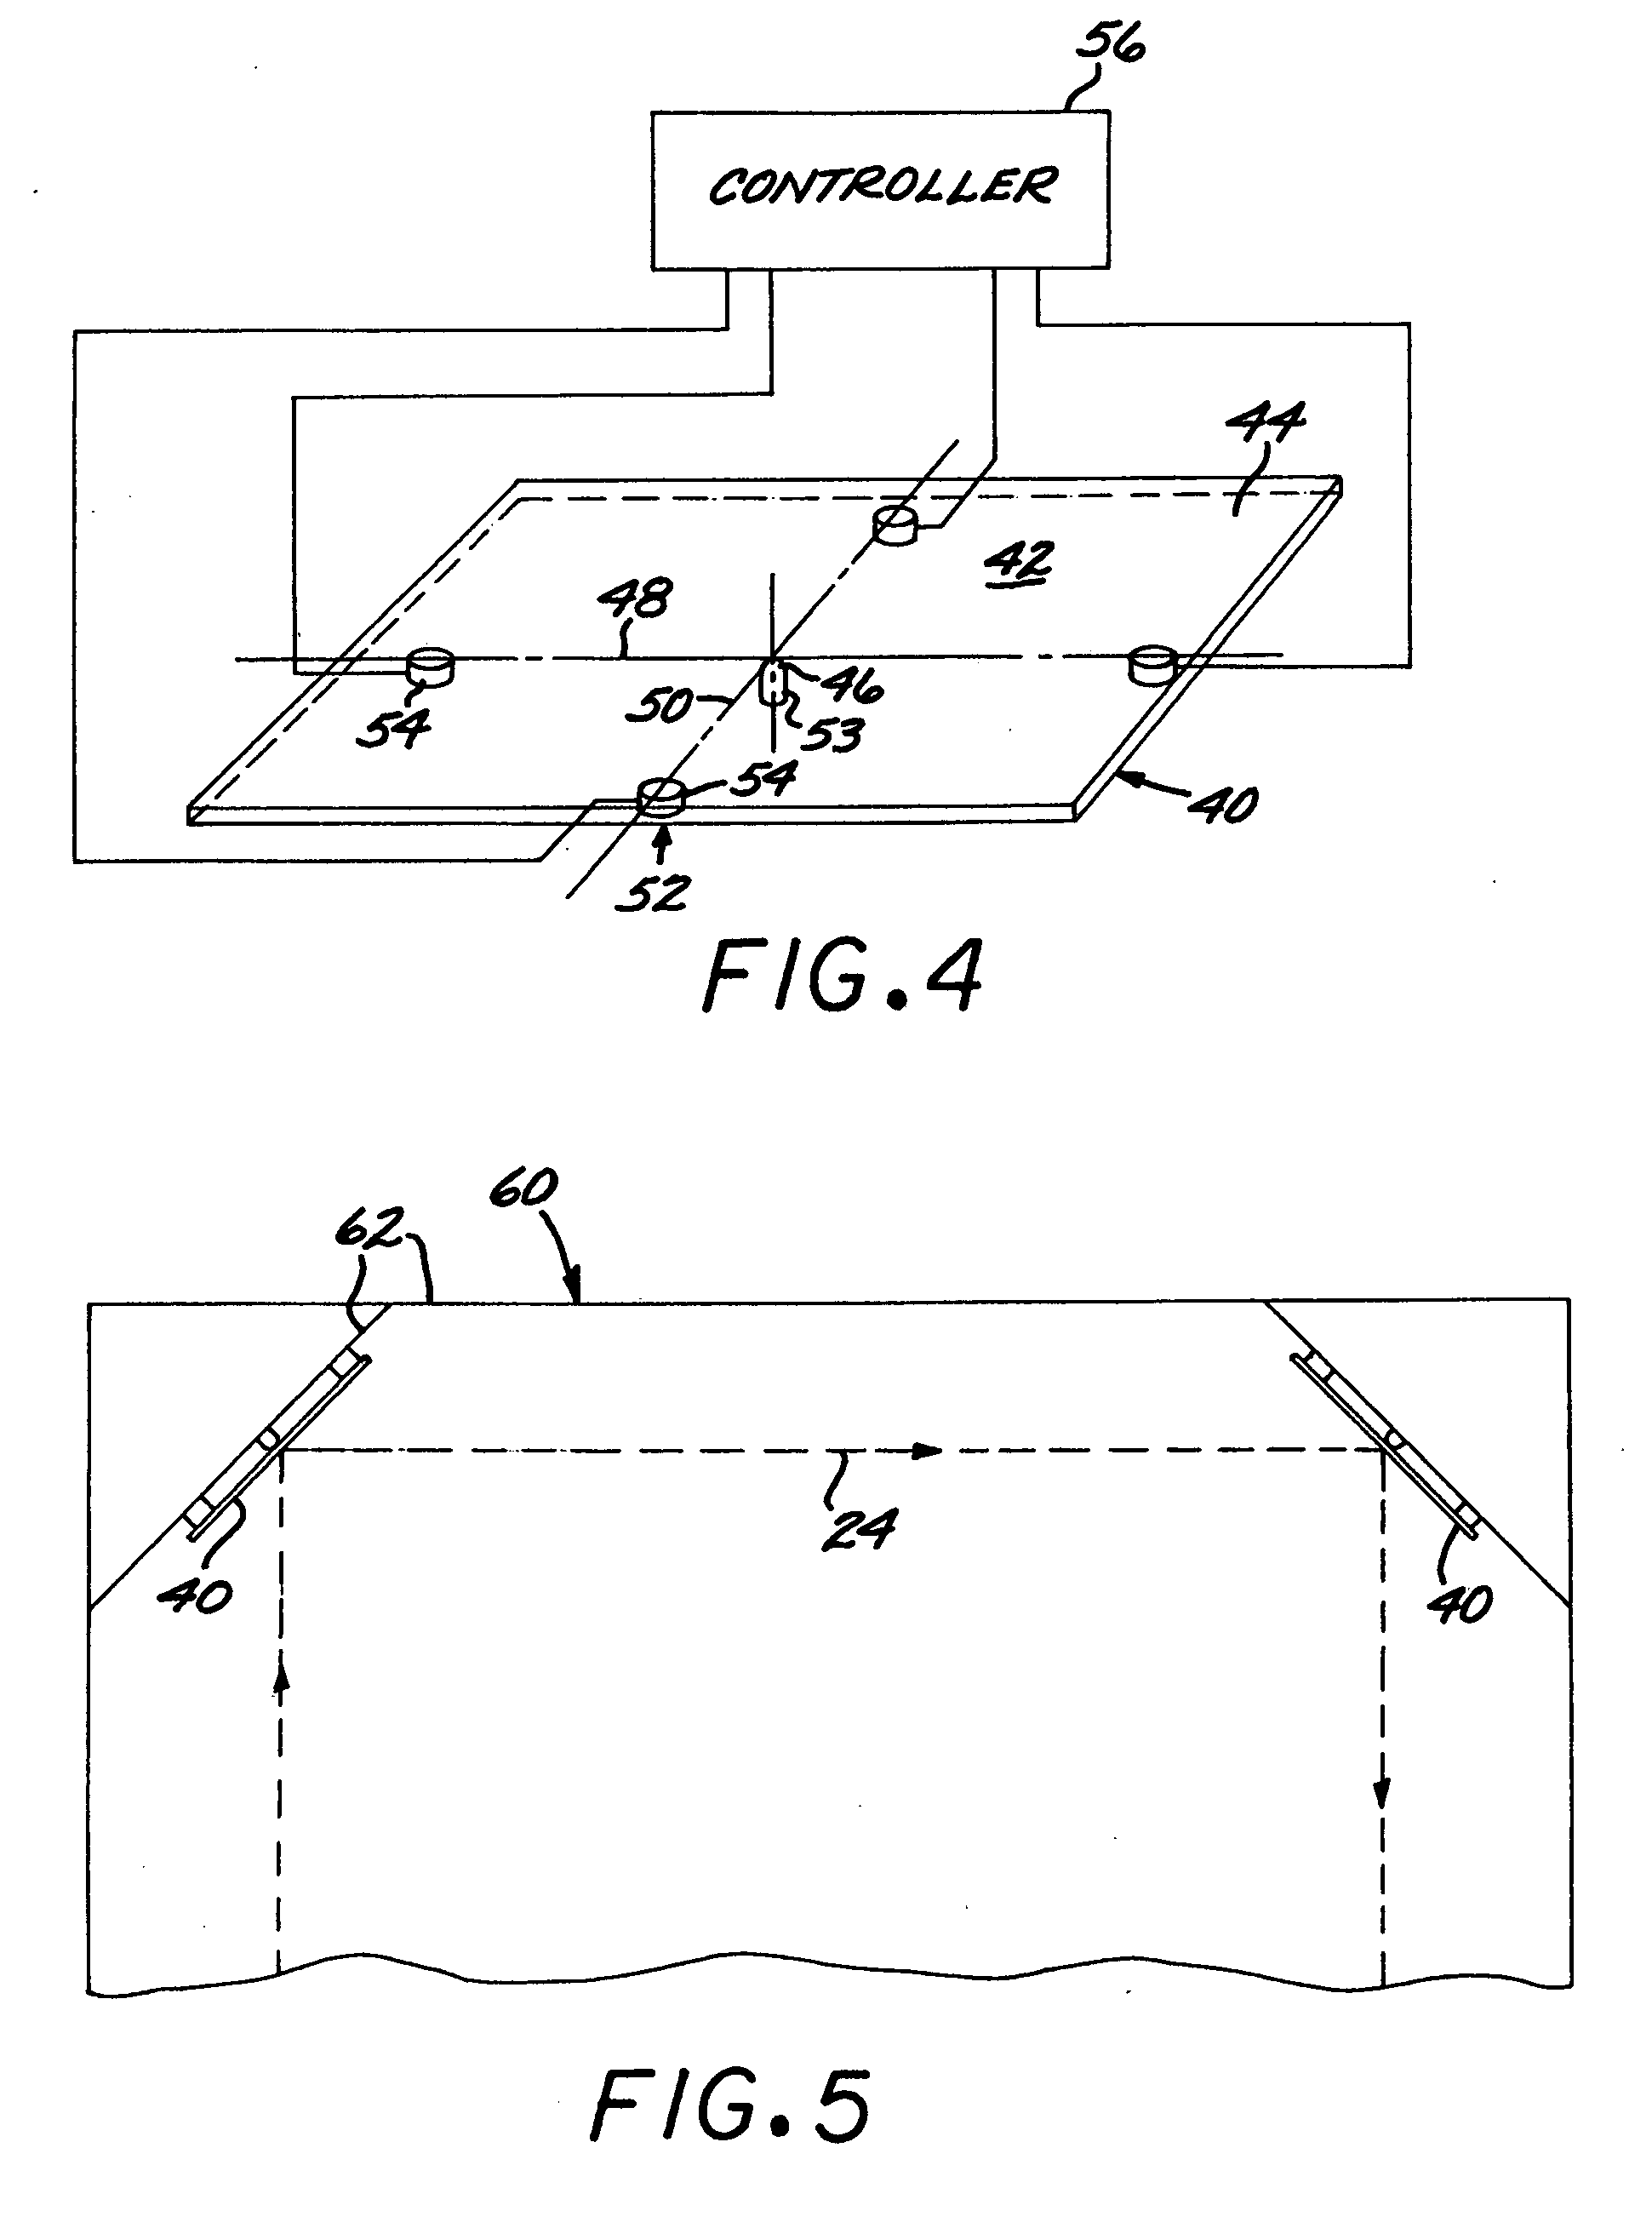 Beam-steering apparatus having five degrees of freedom of line-of-sight steering